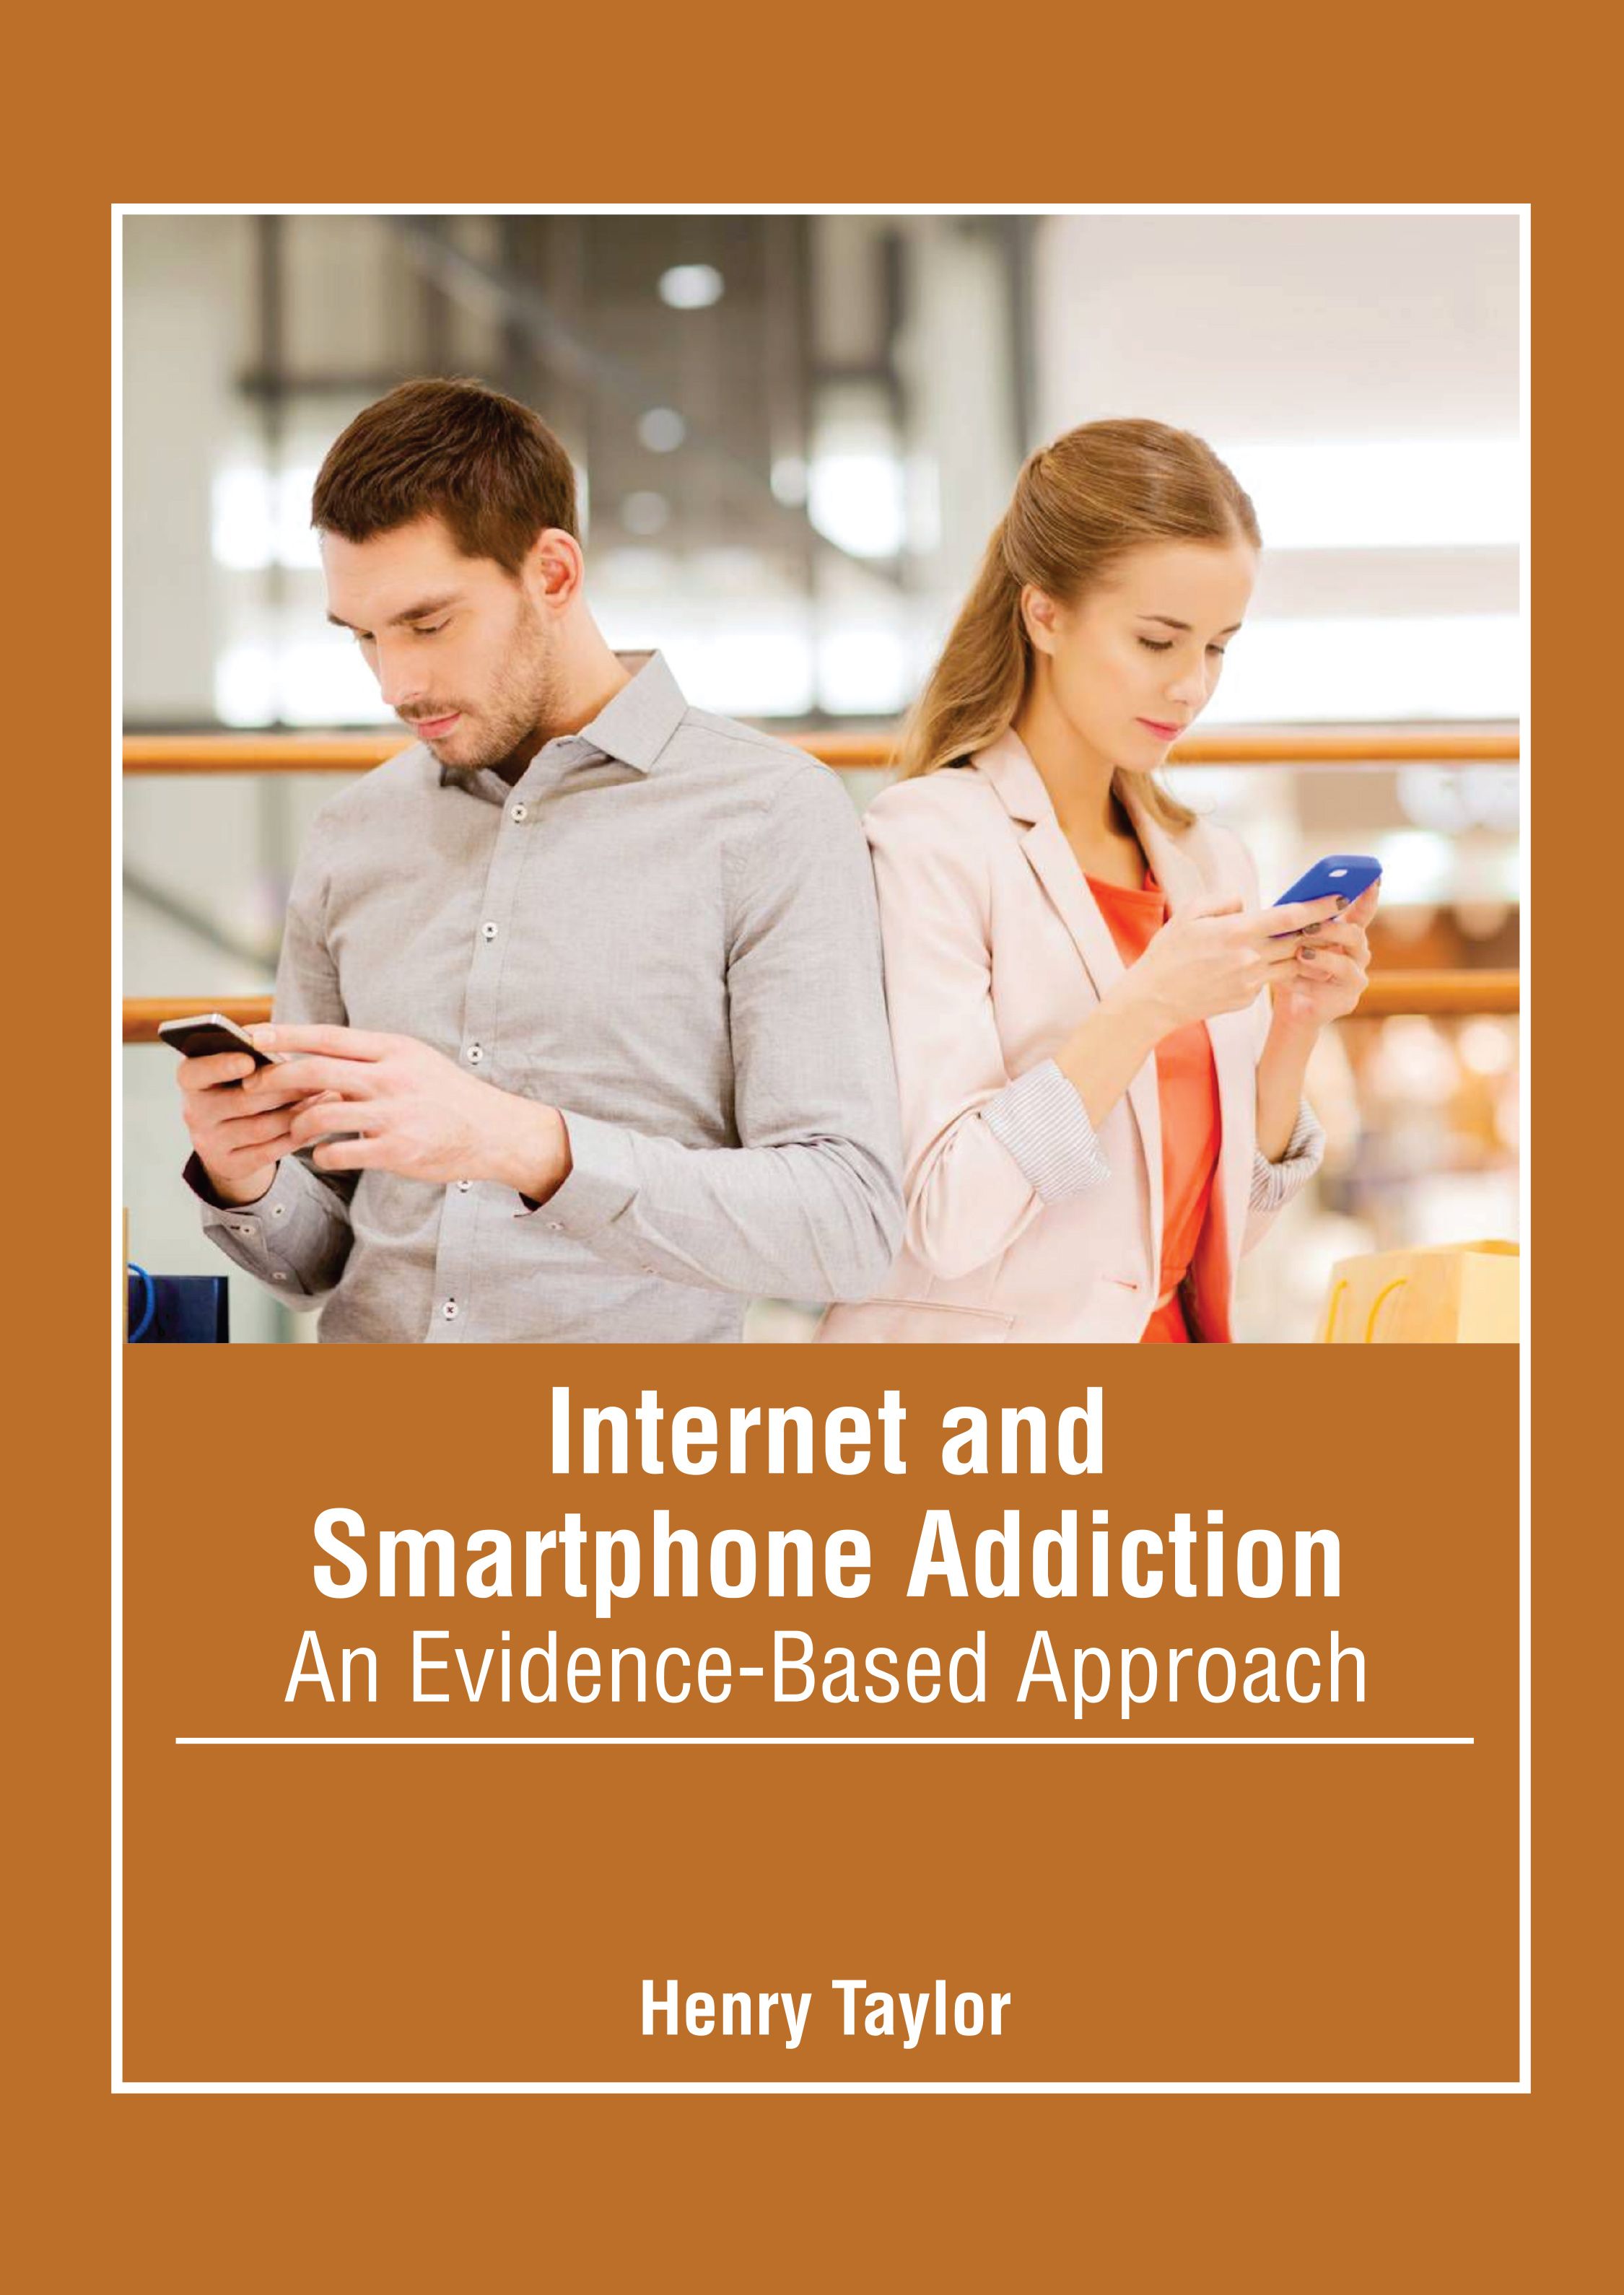 INTERNET AND SMARTPHONE ADDICTION: AN EVIDENCE-BASED APPROACH